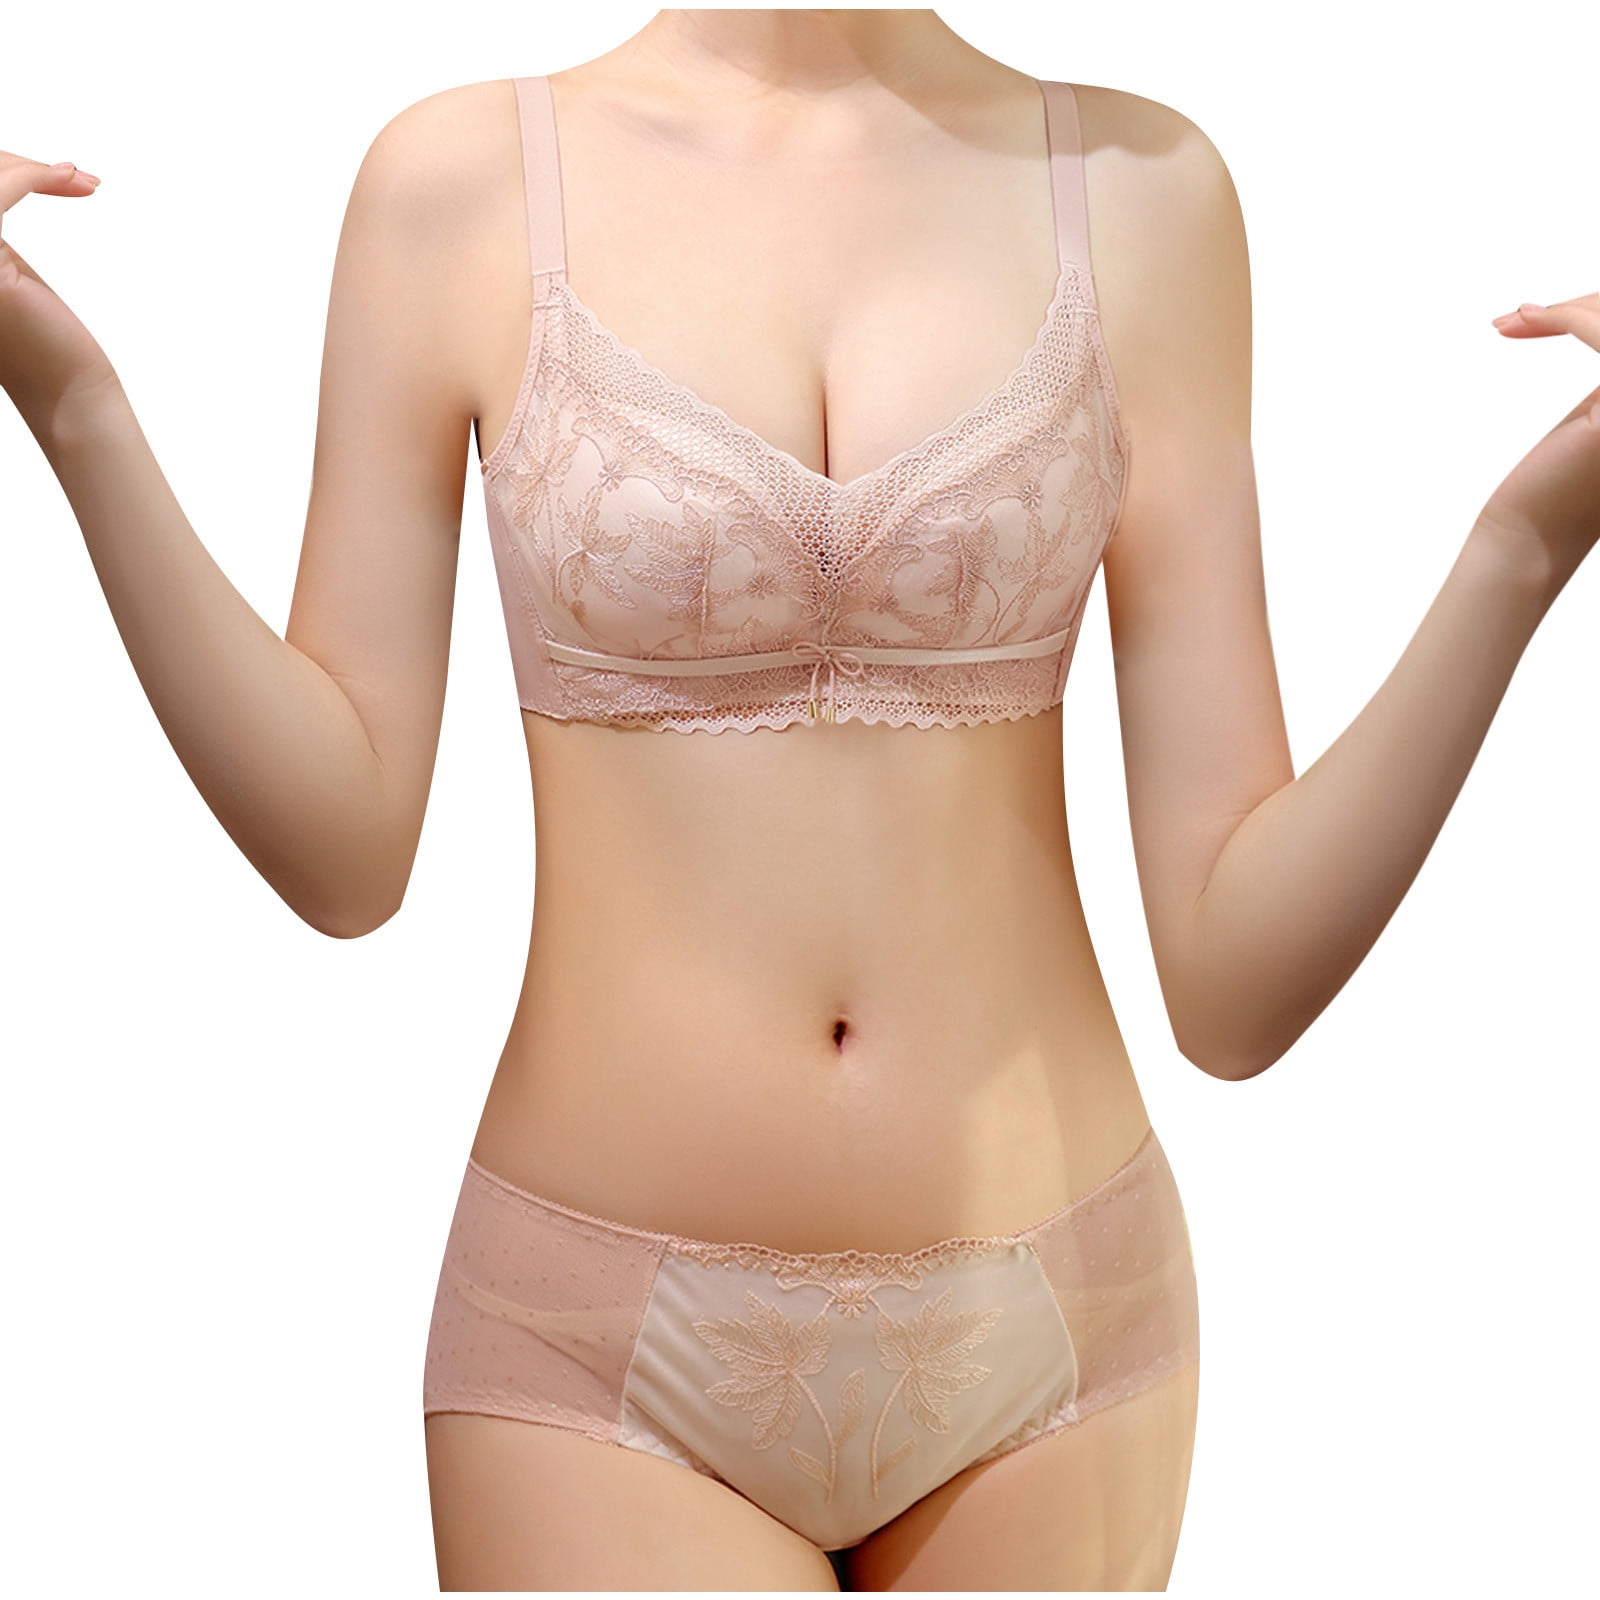  Pink B75 Women's Bra, Shorts, Underwear, Top and Bottom Set,  Women's Wire Included, Underpants, Soft, Room Wireless, Wedding, Cording,  Pan, Exquisite with Cleavage Hook, No See-Through, Legacy, Back, Beautiful,  Elegant, Cotton